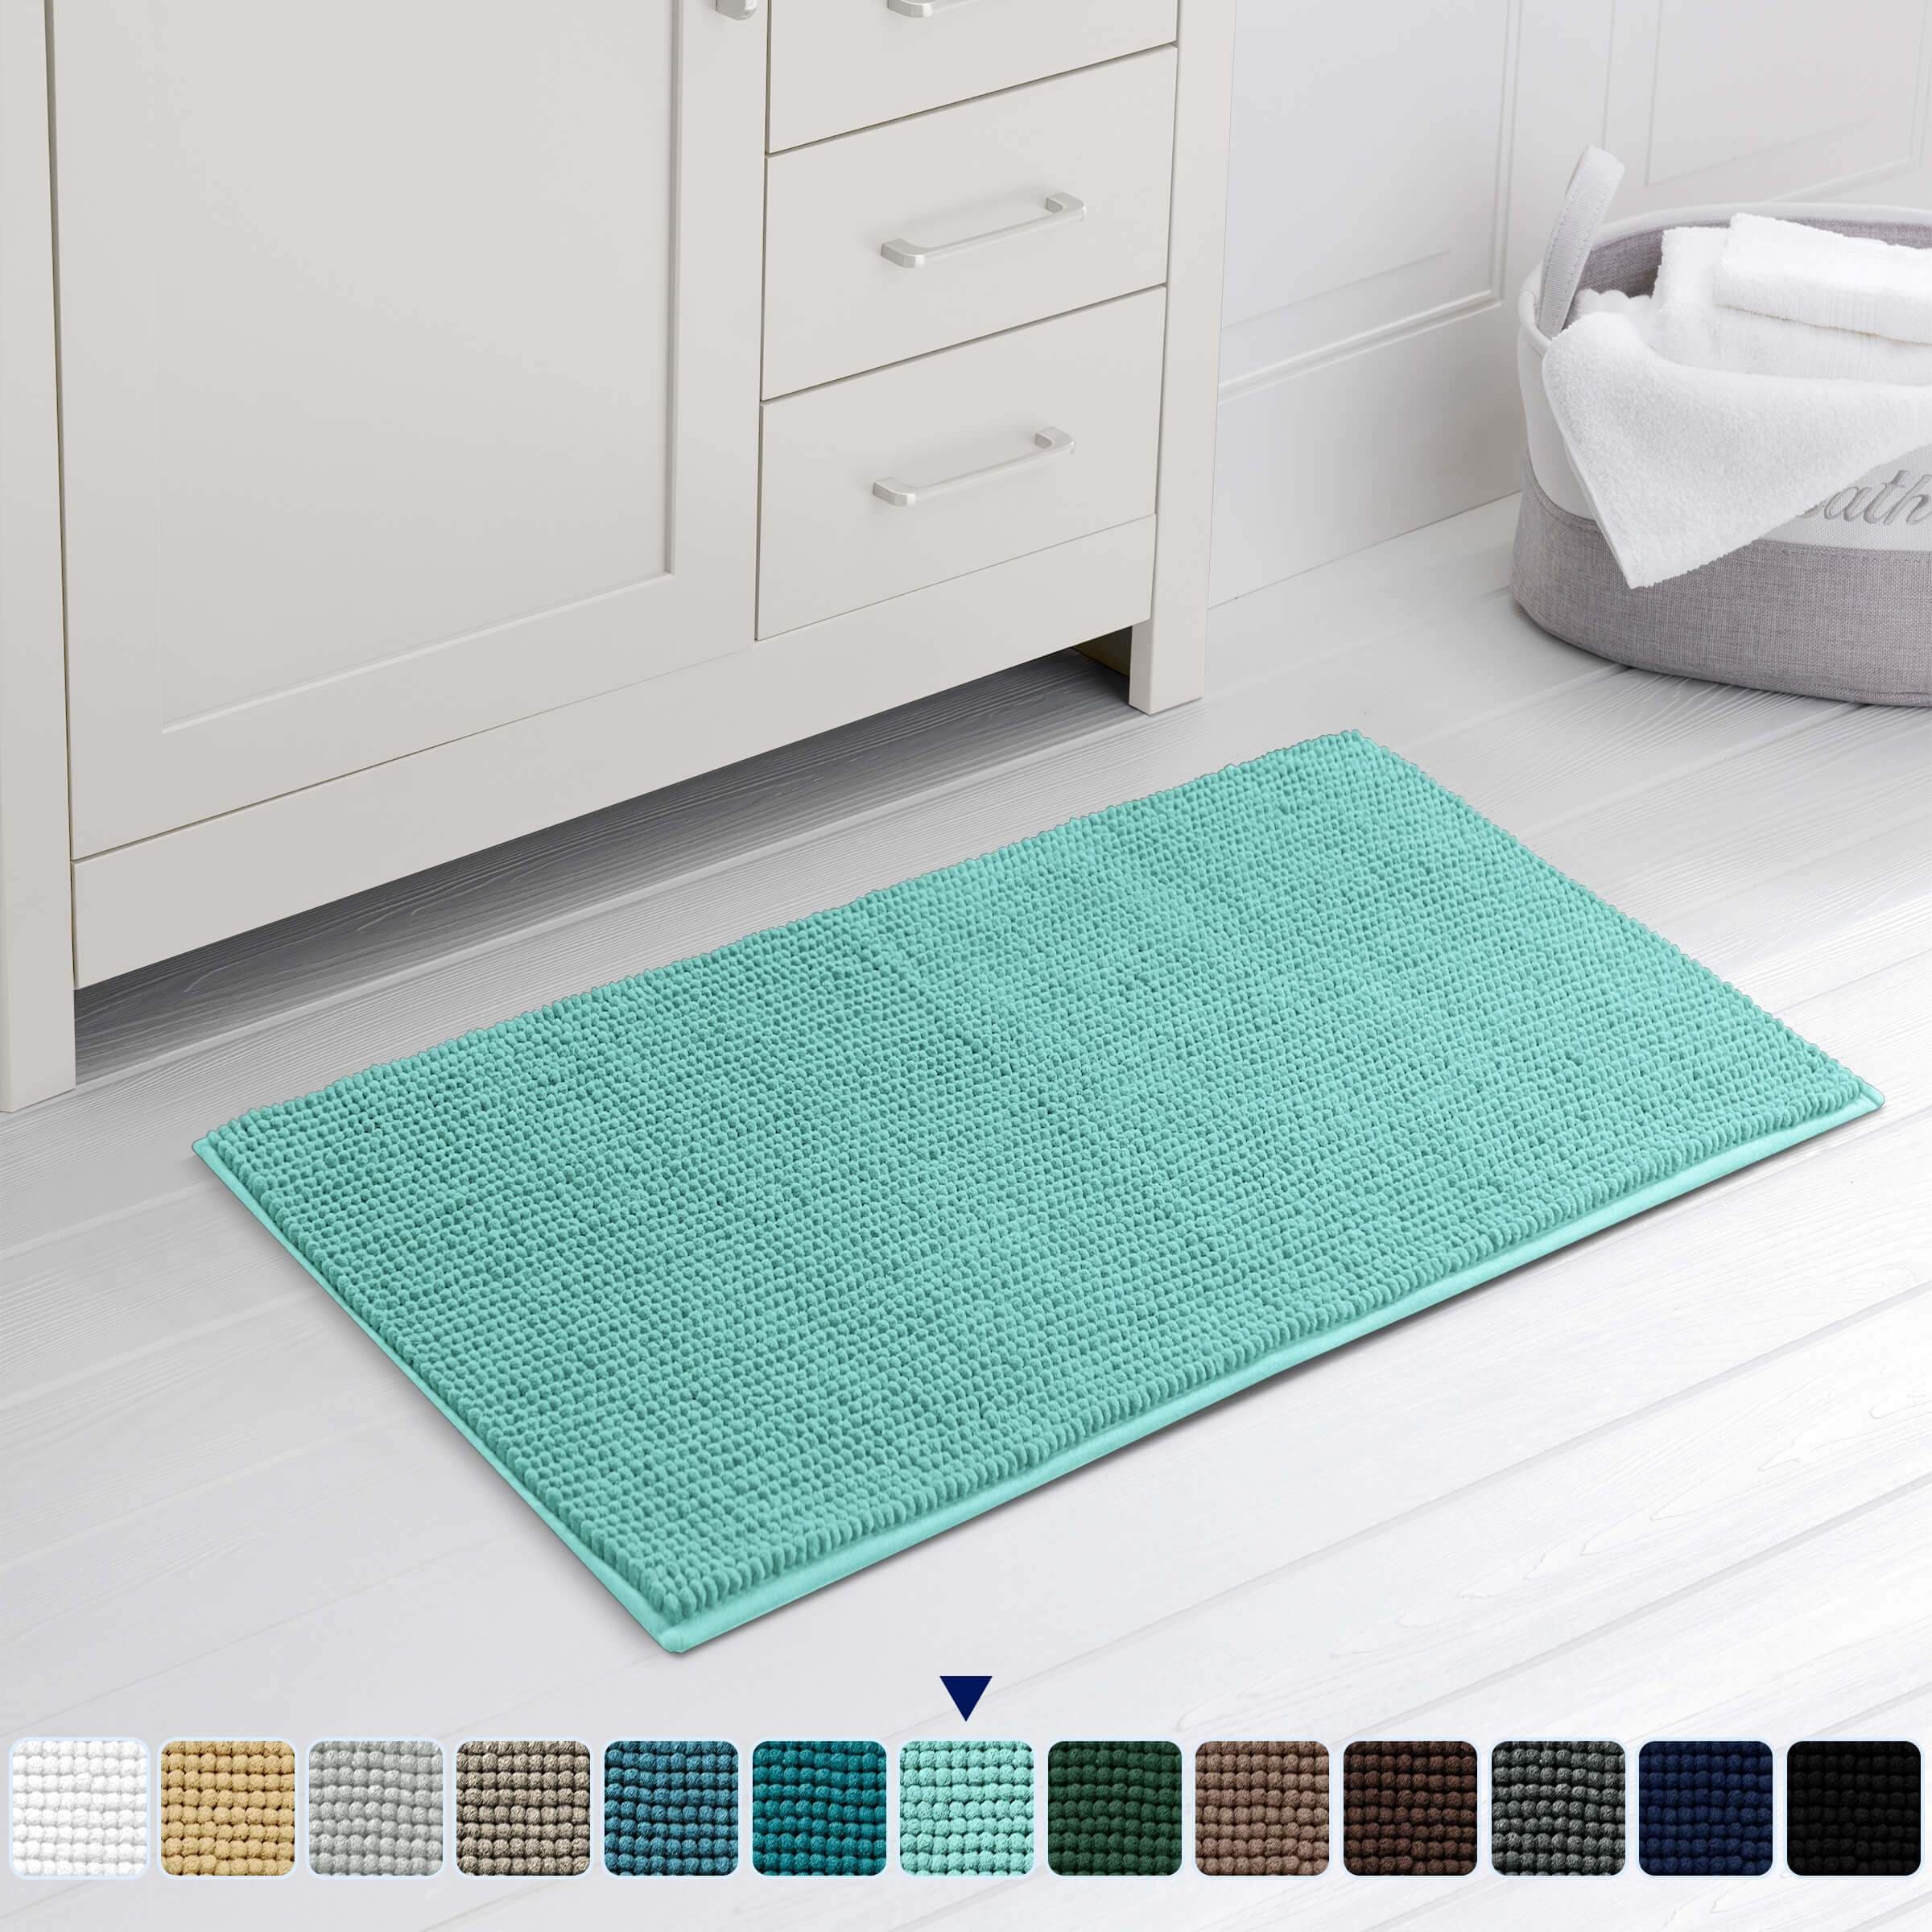 https://ak1.ostkcdn.com/images/products/is/images/direct/50470efd6b7afe17e69c808062d91c052b7c3102/Subrtex-Chenille-Bathroom-Rugs-Soft-Super-Water-Absorbing-Shower-Mats.jpg